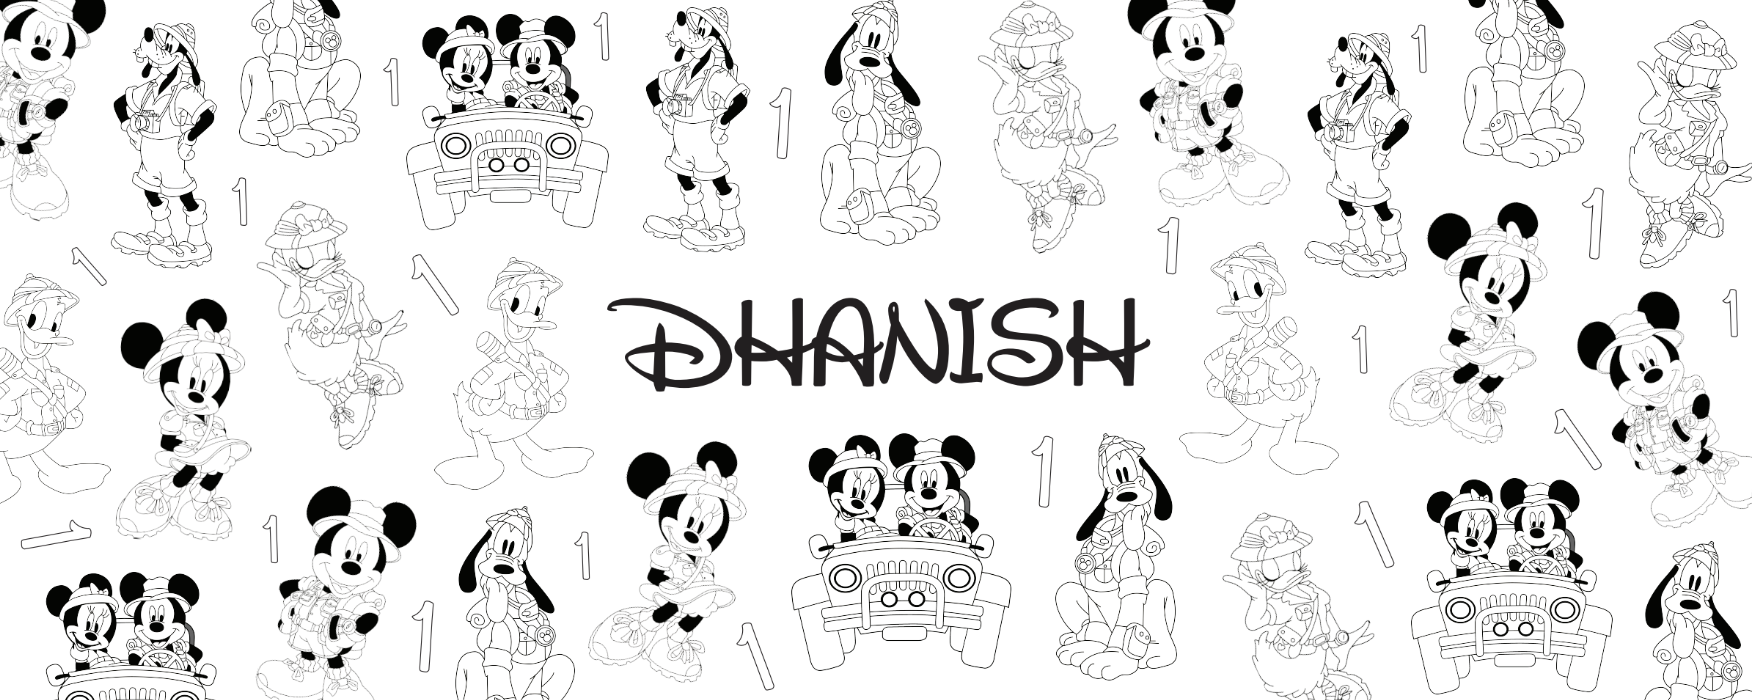 Mickey & friends colouring in table runner